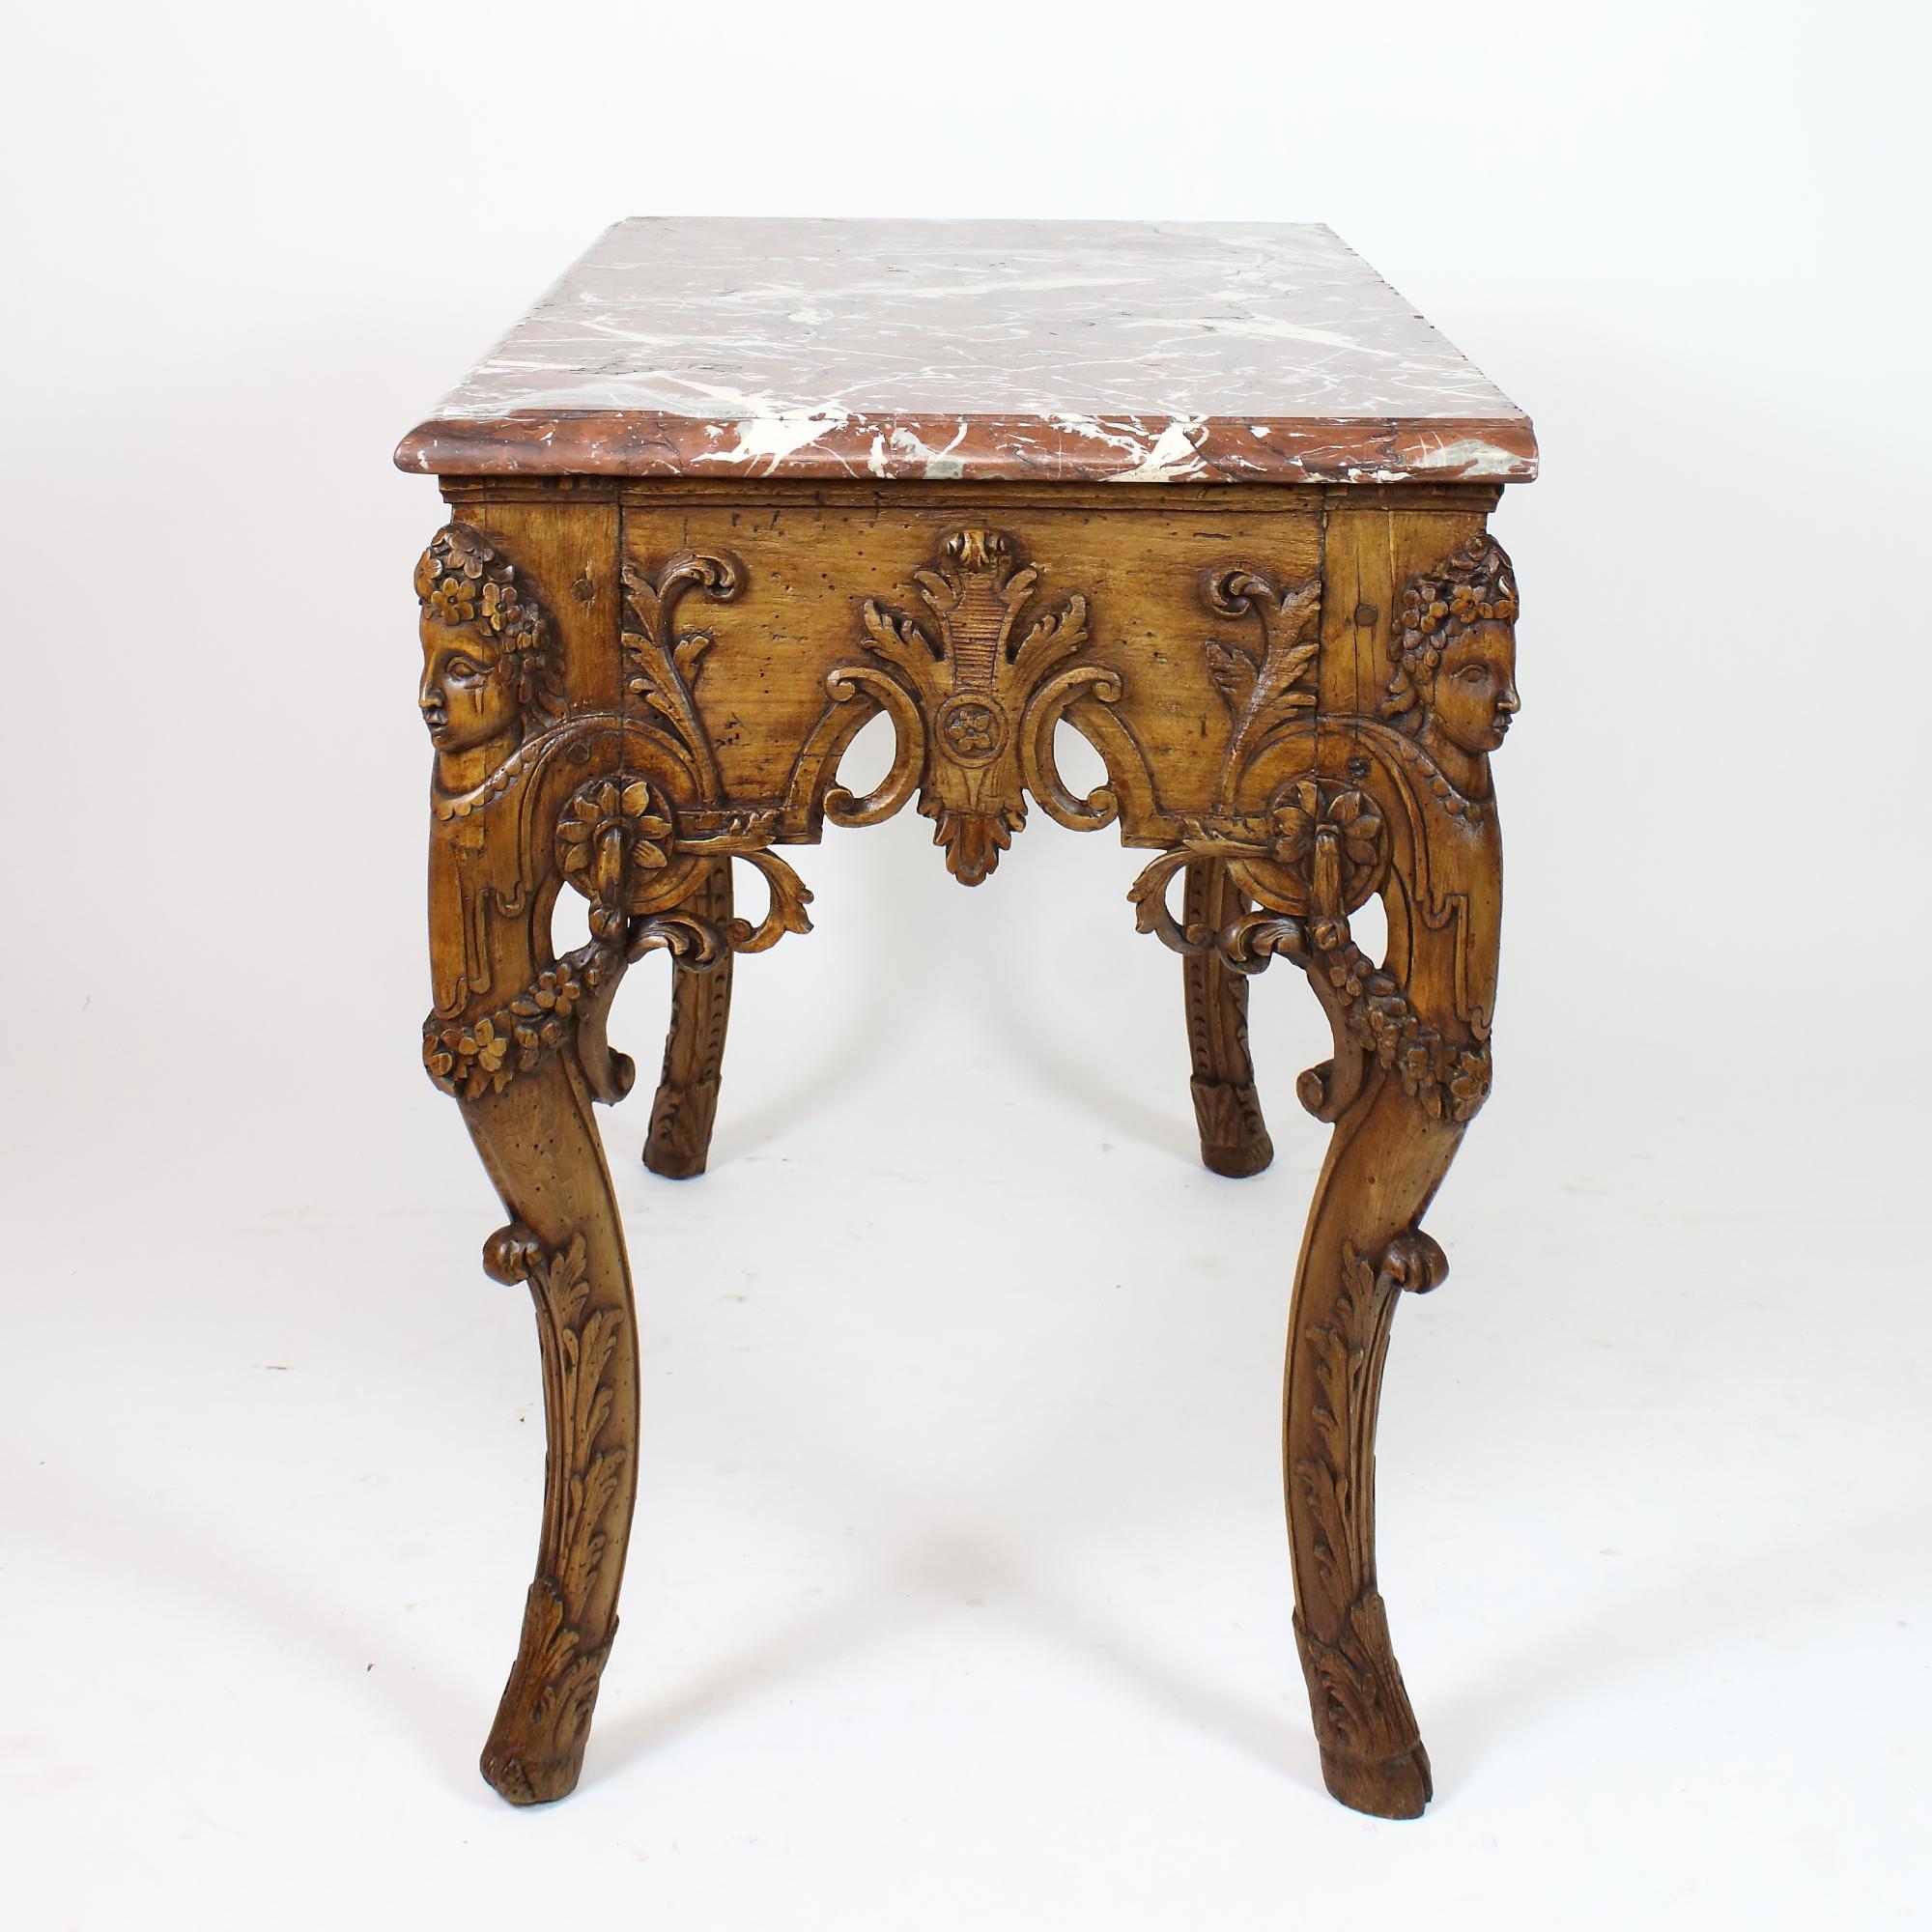 Early 18th century Louis XIV figural carved wood console table or 